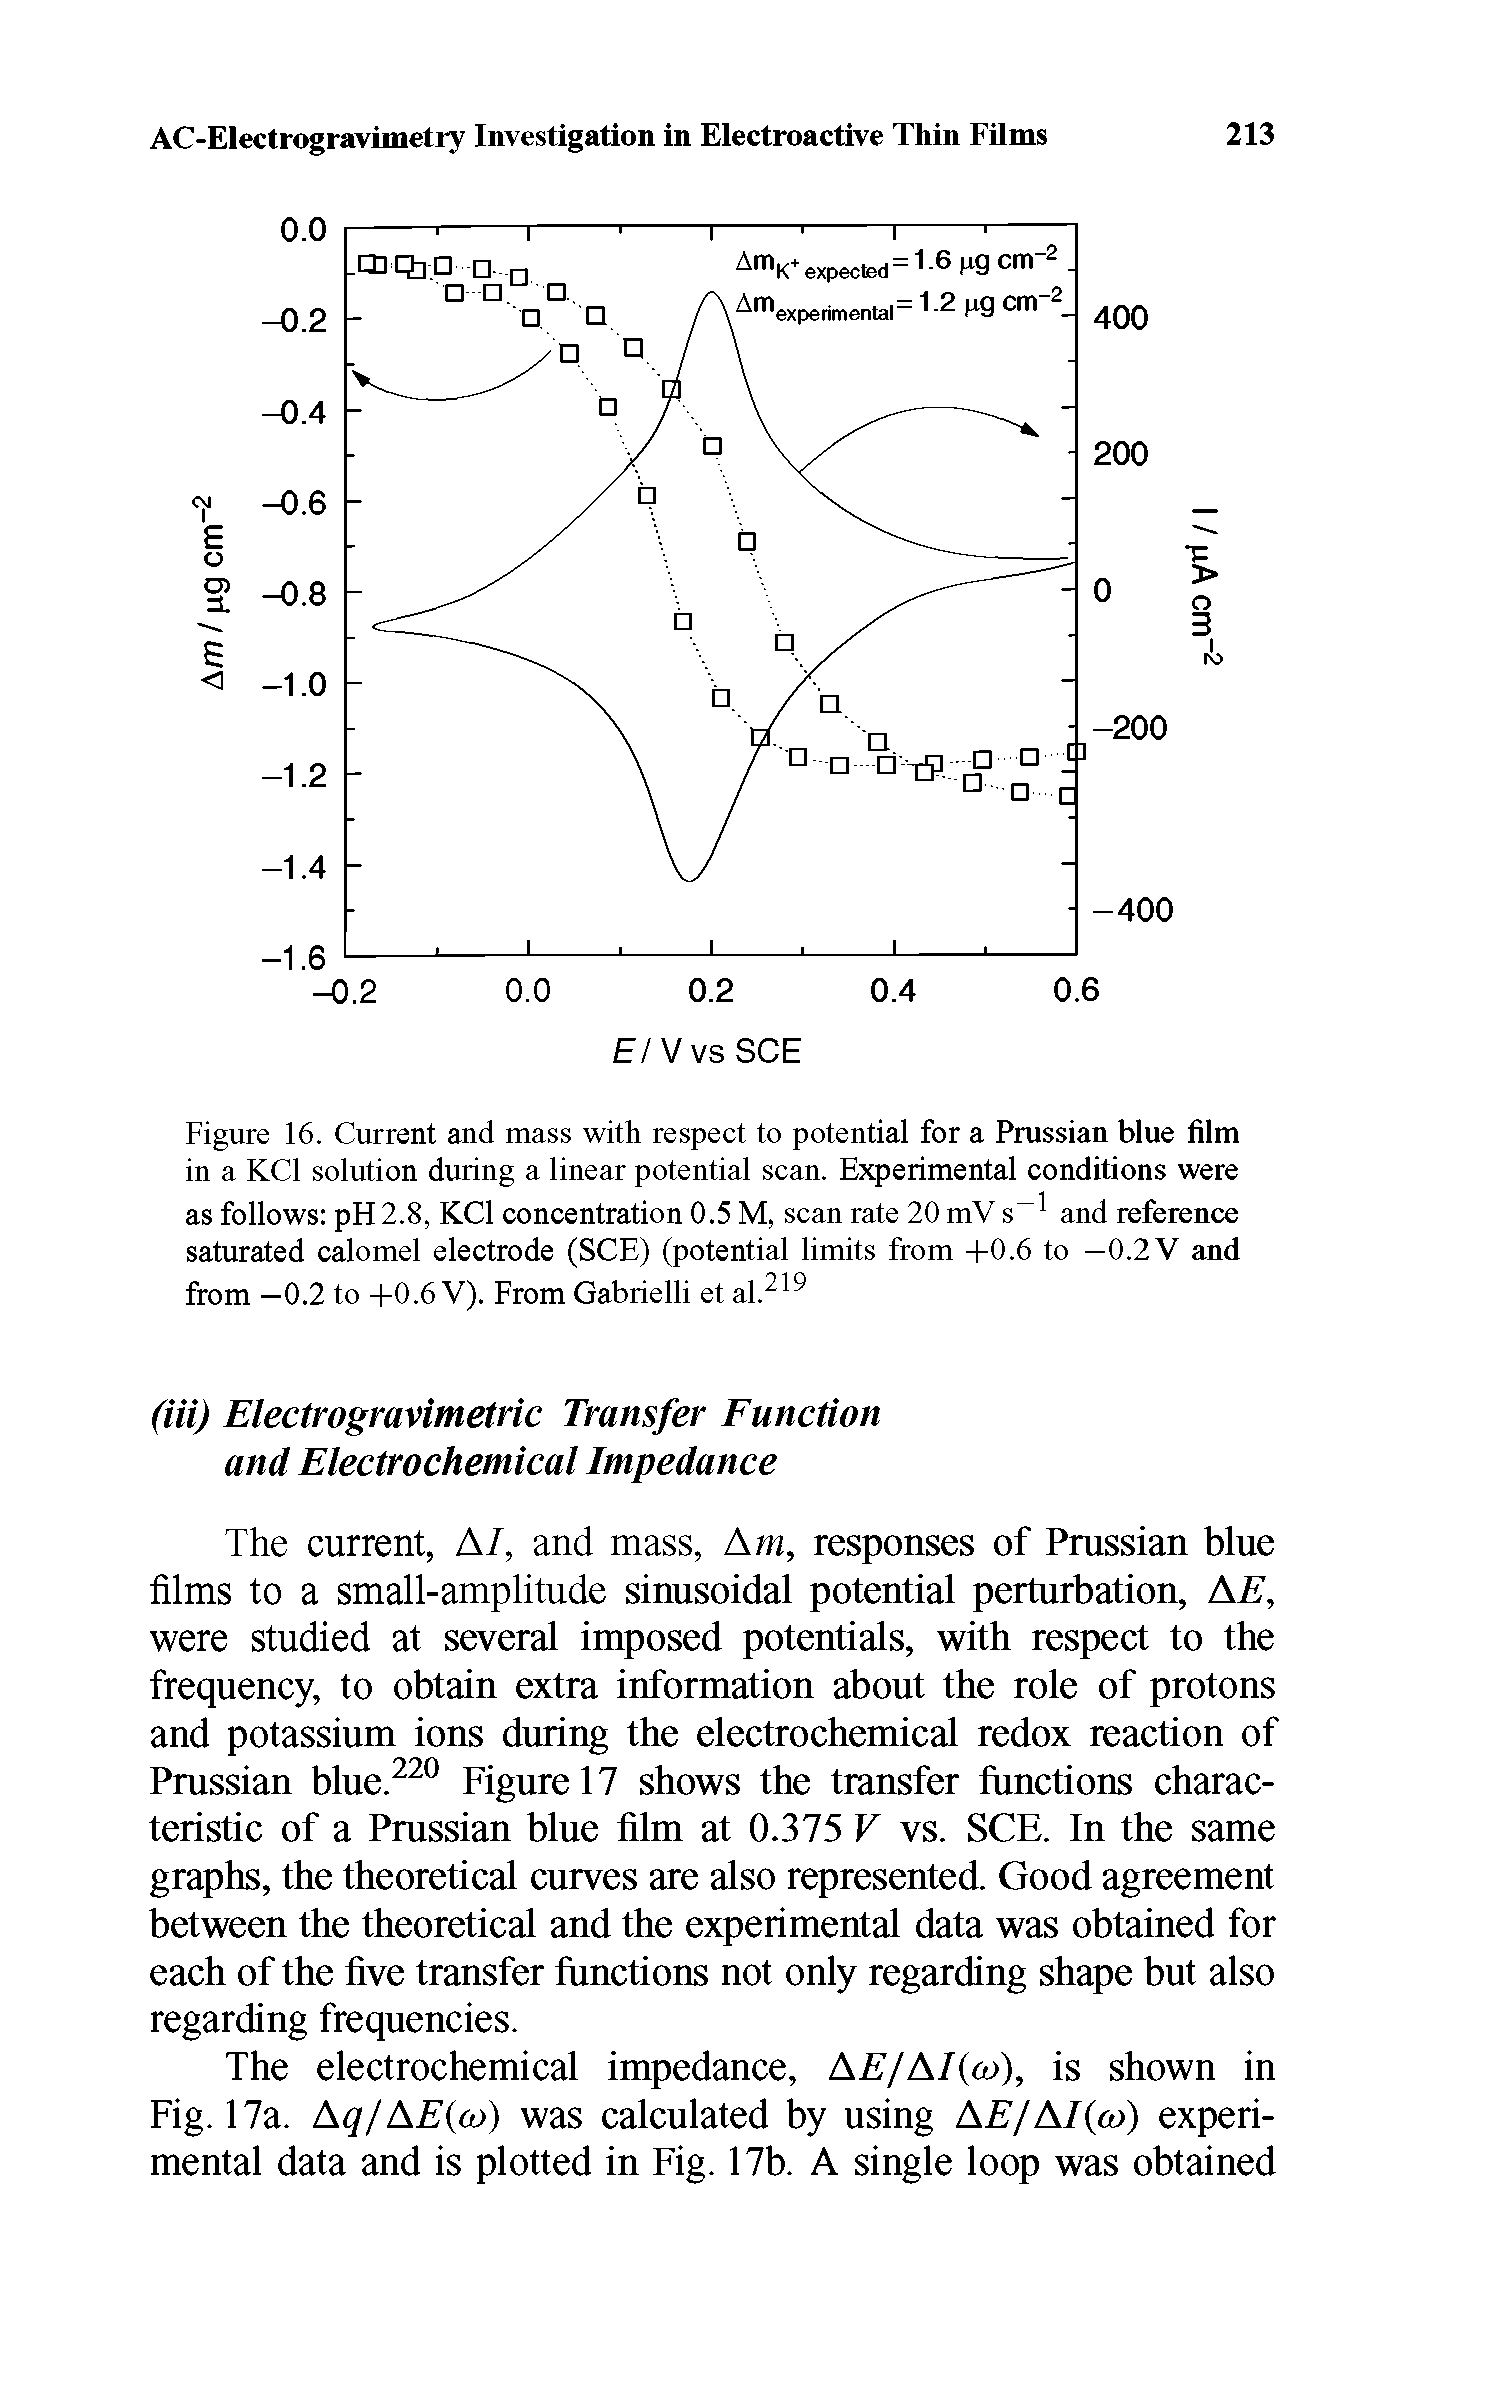 Figure 16. Current and mass with respect to potential for a Prussian blue film in a KCl solution during a linear potential scan. Experimental conditions were as follows pH 2.8, KCl concentration 0.5 M, scan rate 20 mV s and reference saturated calomel electrode (SCE) (potential limits from +0.6 to —0.2 V and from —0.2 to +0.6 V). From Gabrielli et al. ...